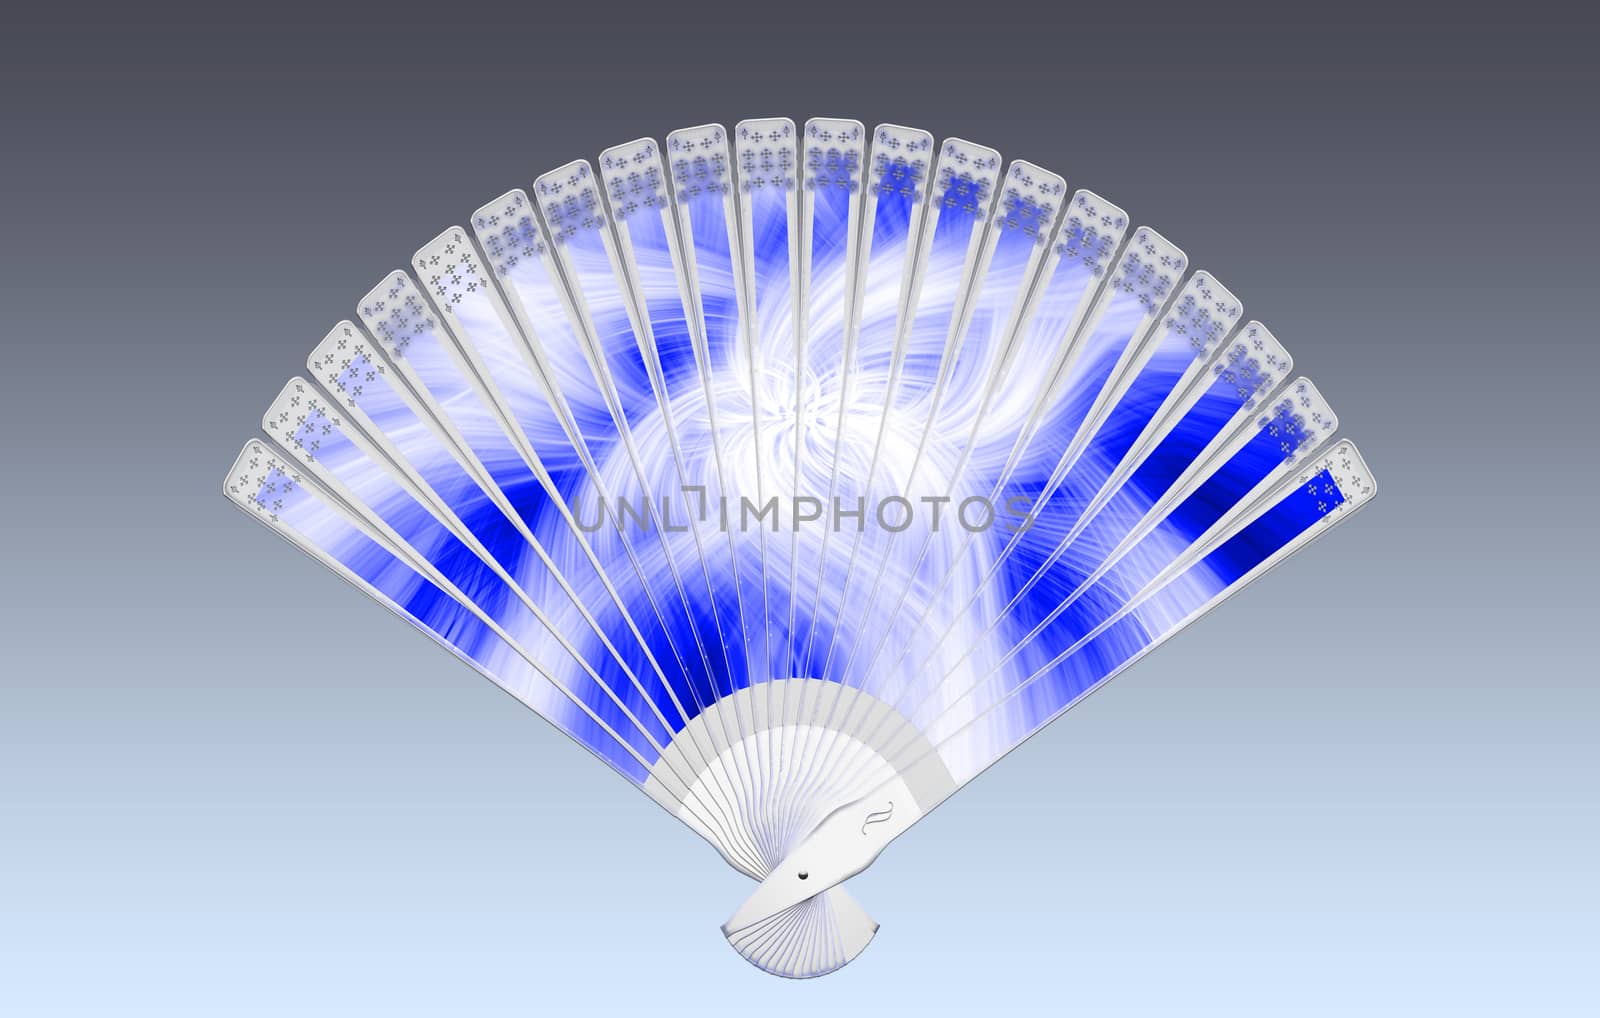 Colorful hand fan. Isolated on gray